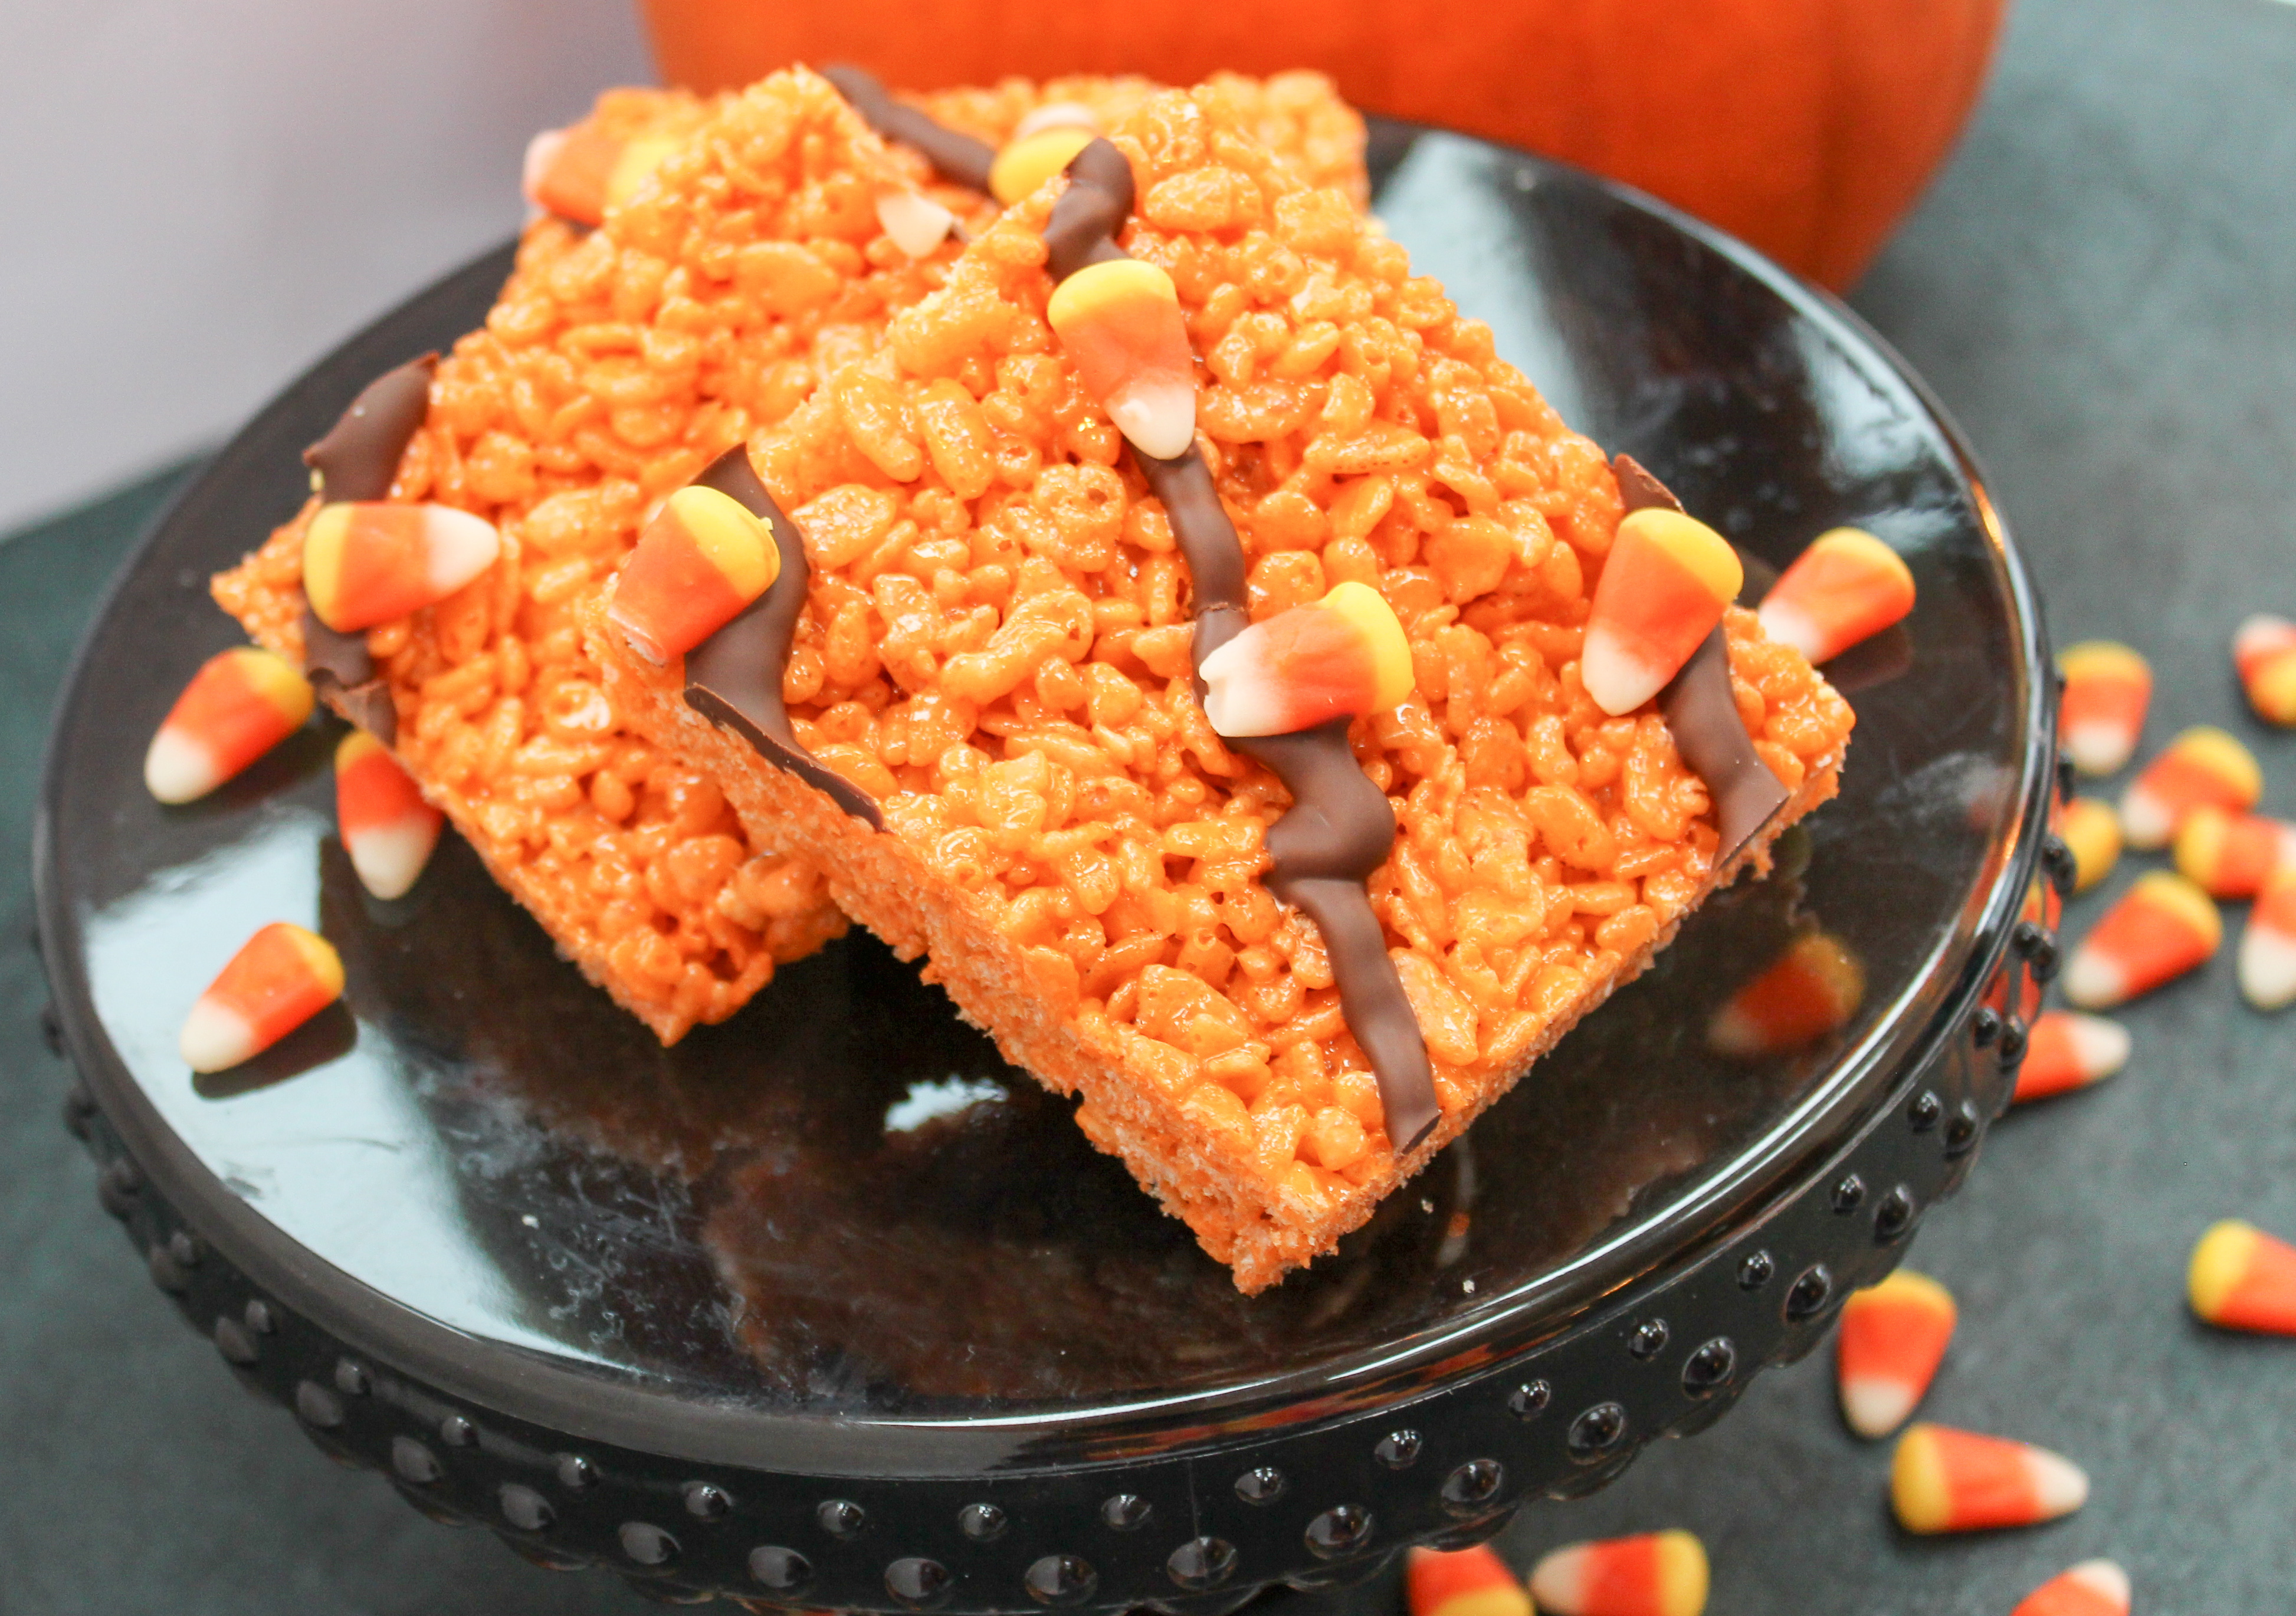 Rice Crispy Cereal cut into squares. Garnished with Candy Corn and Chocolate